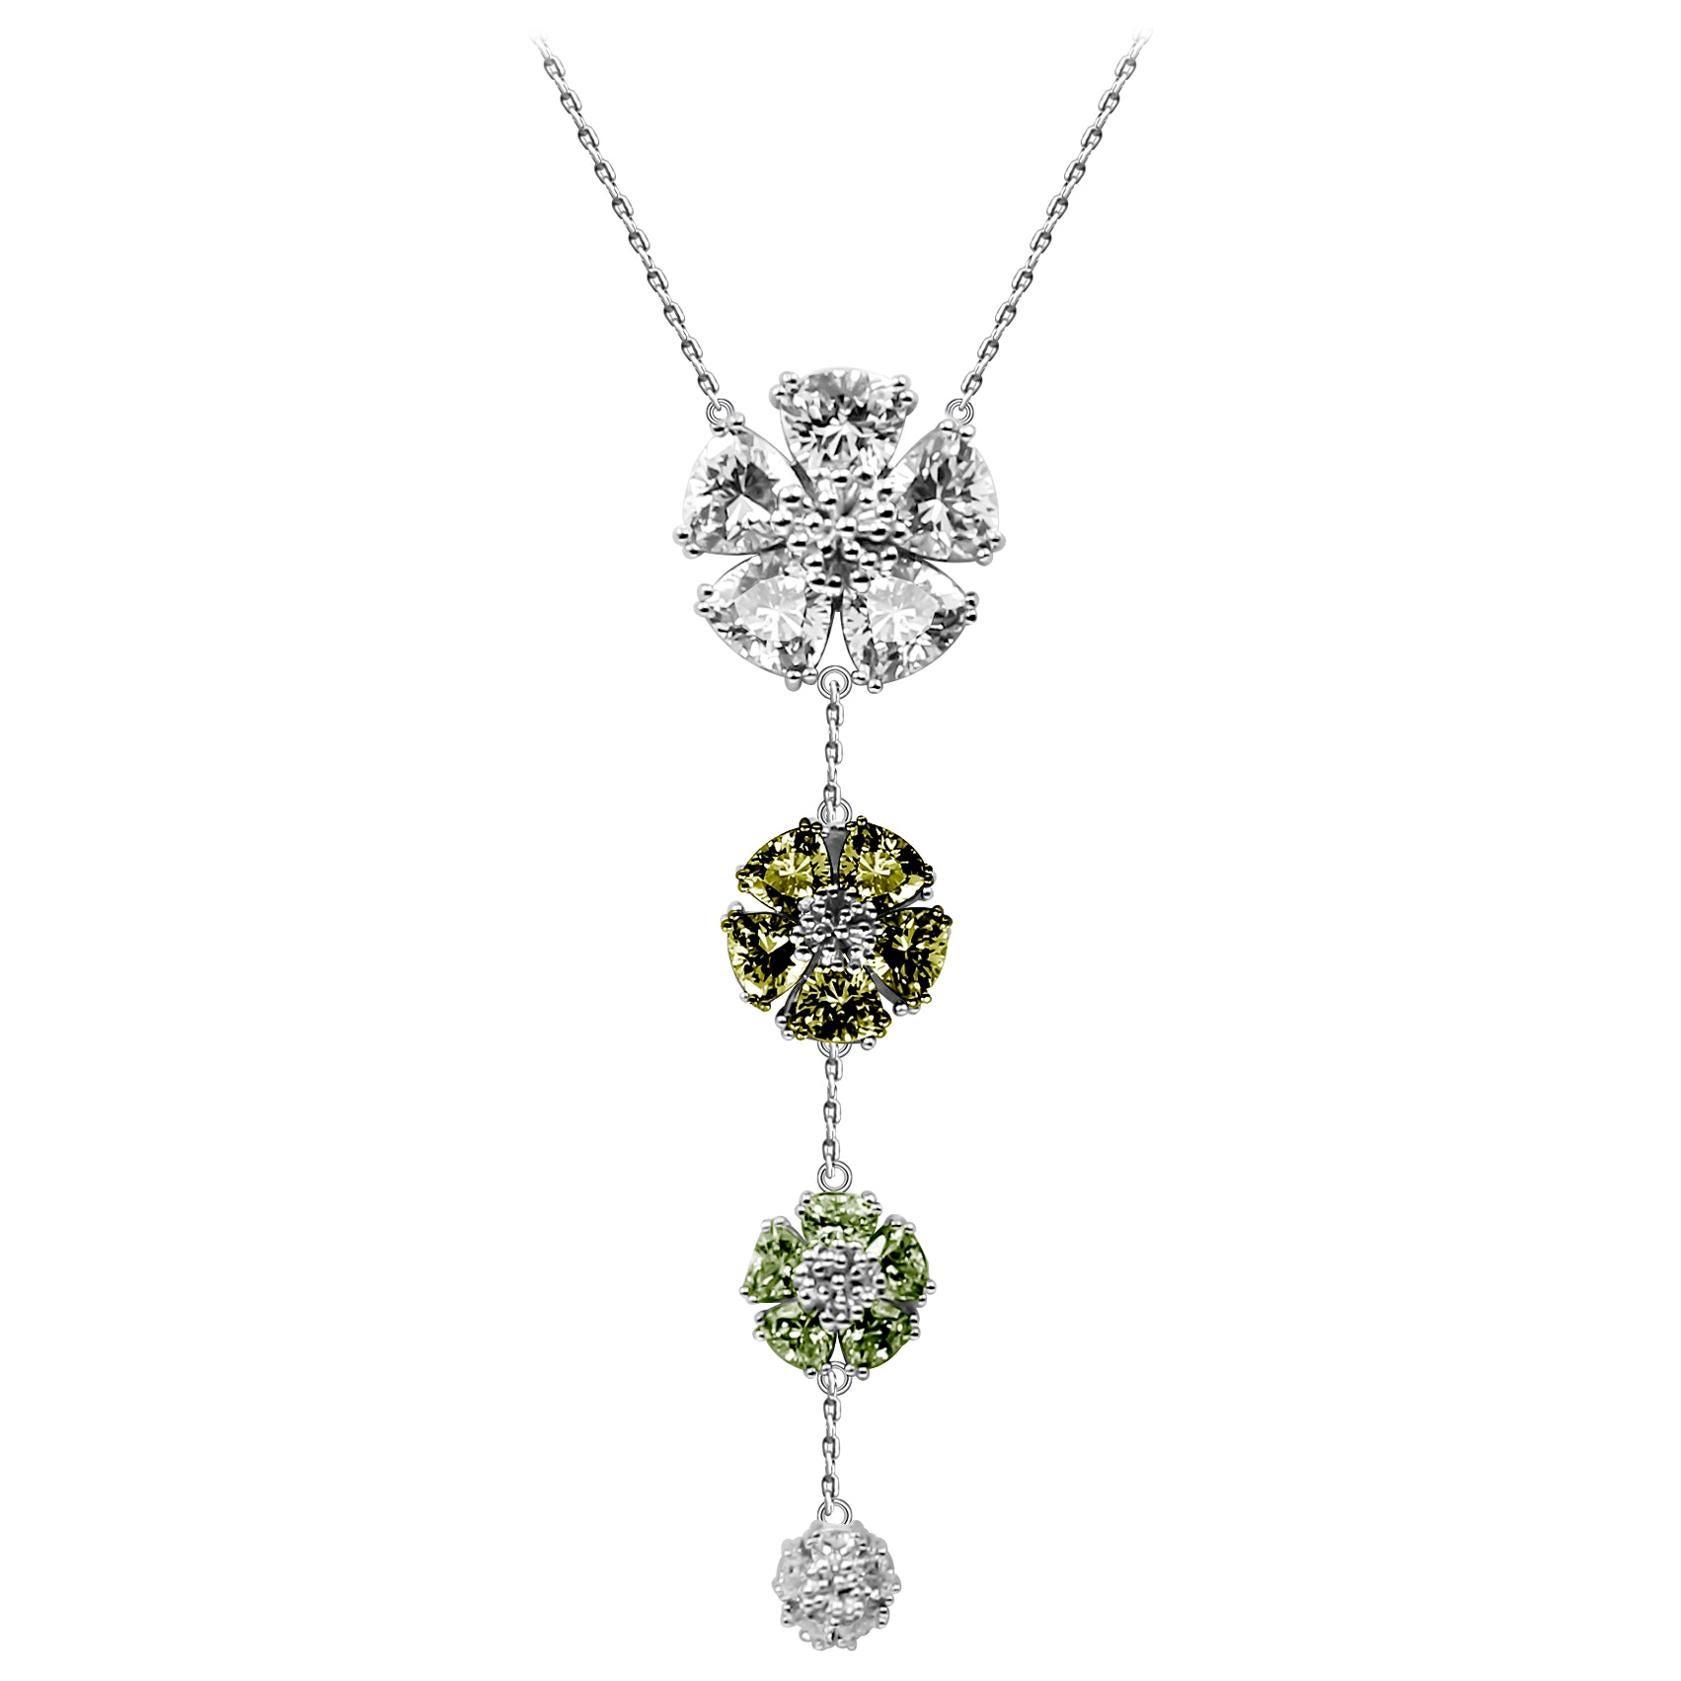 White Topaz Olive Green & Green Amethyst Graduated Blossom Stone Lariat Necklace